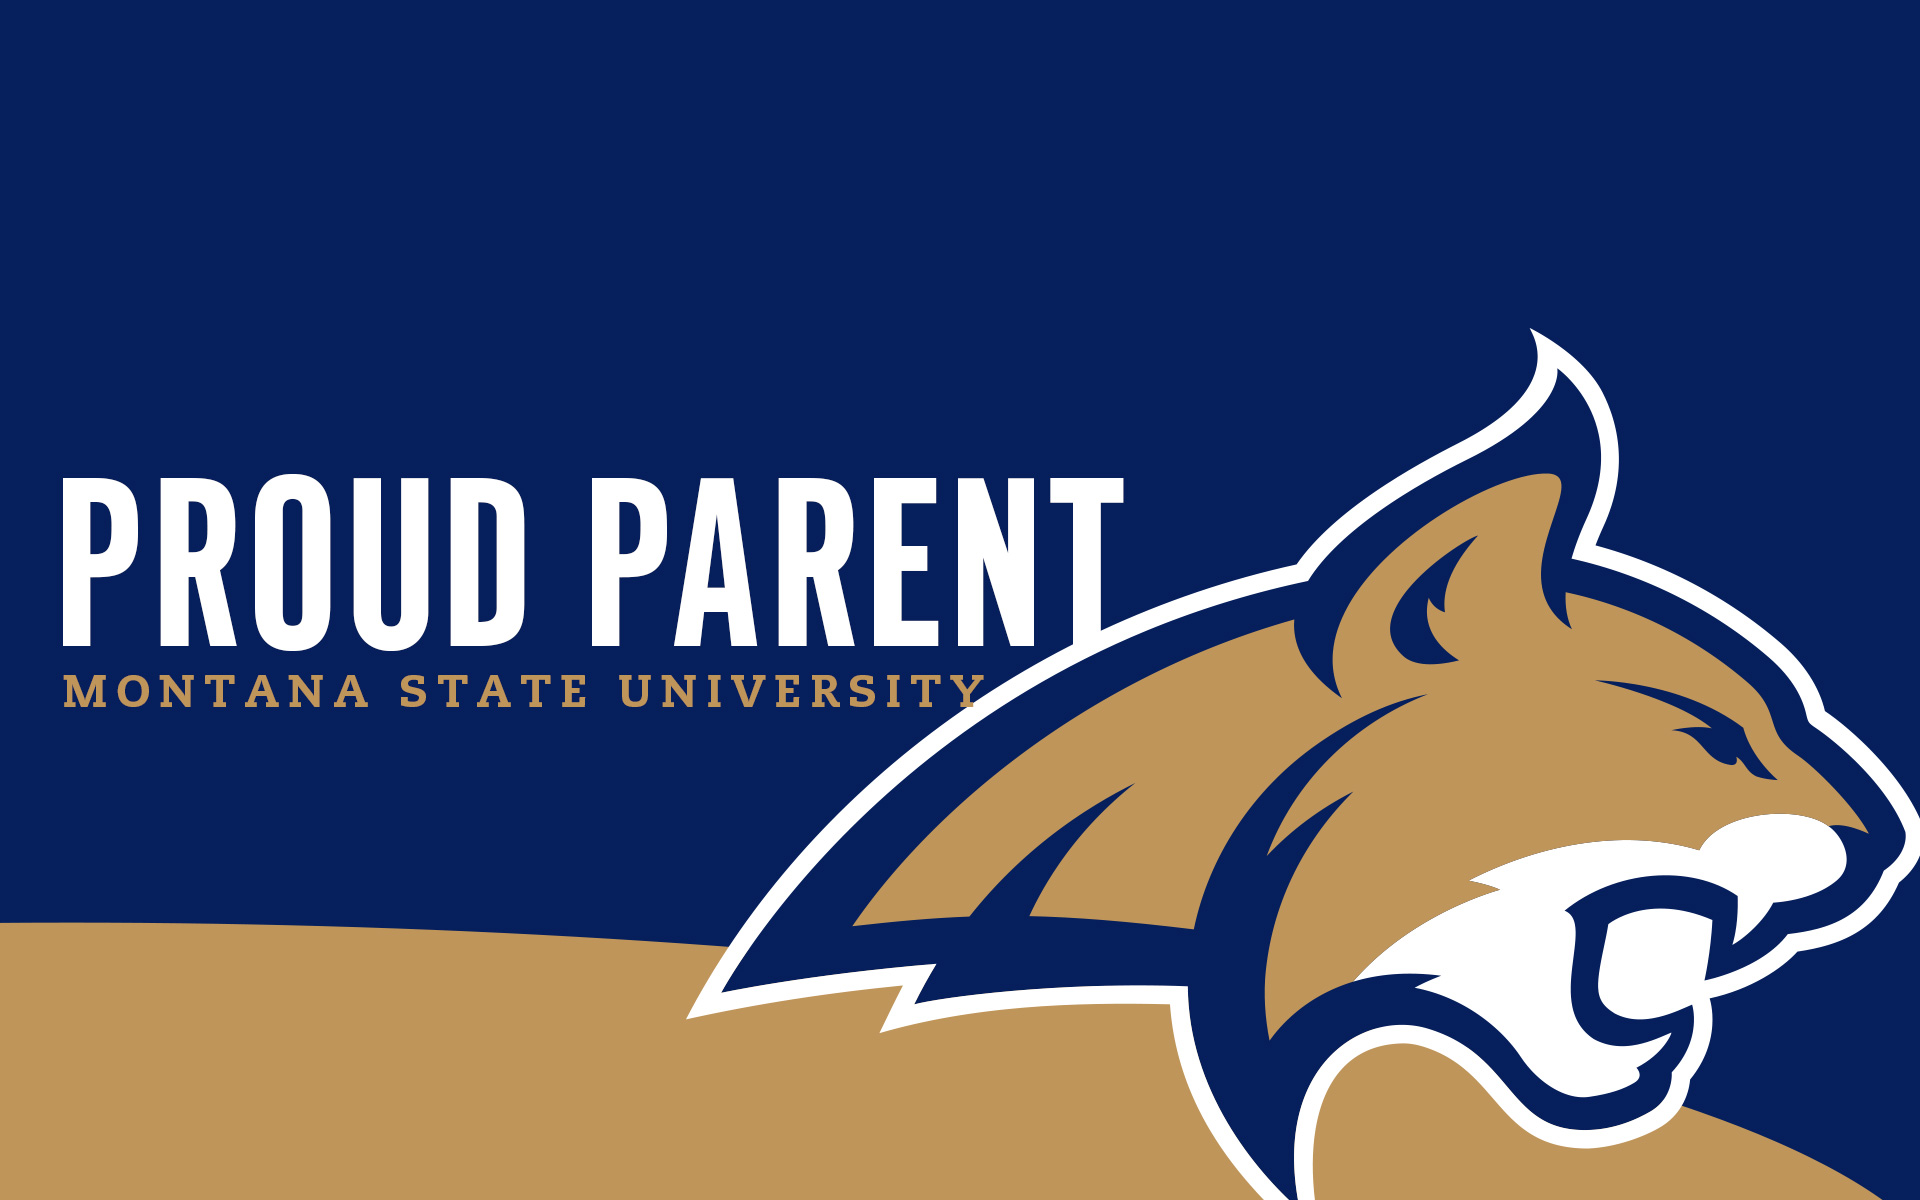 Montana State Wallpapers